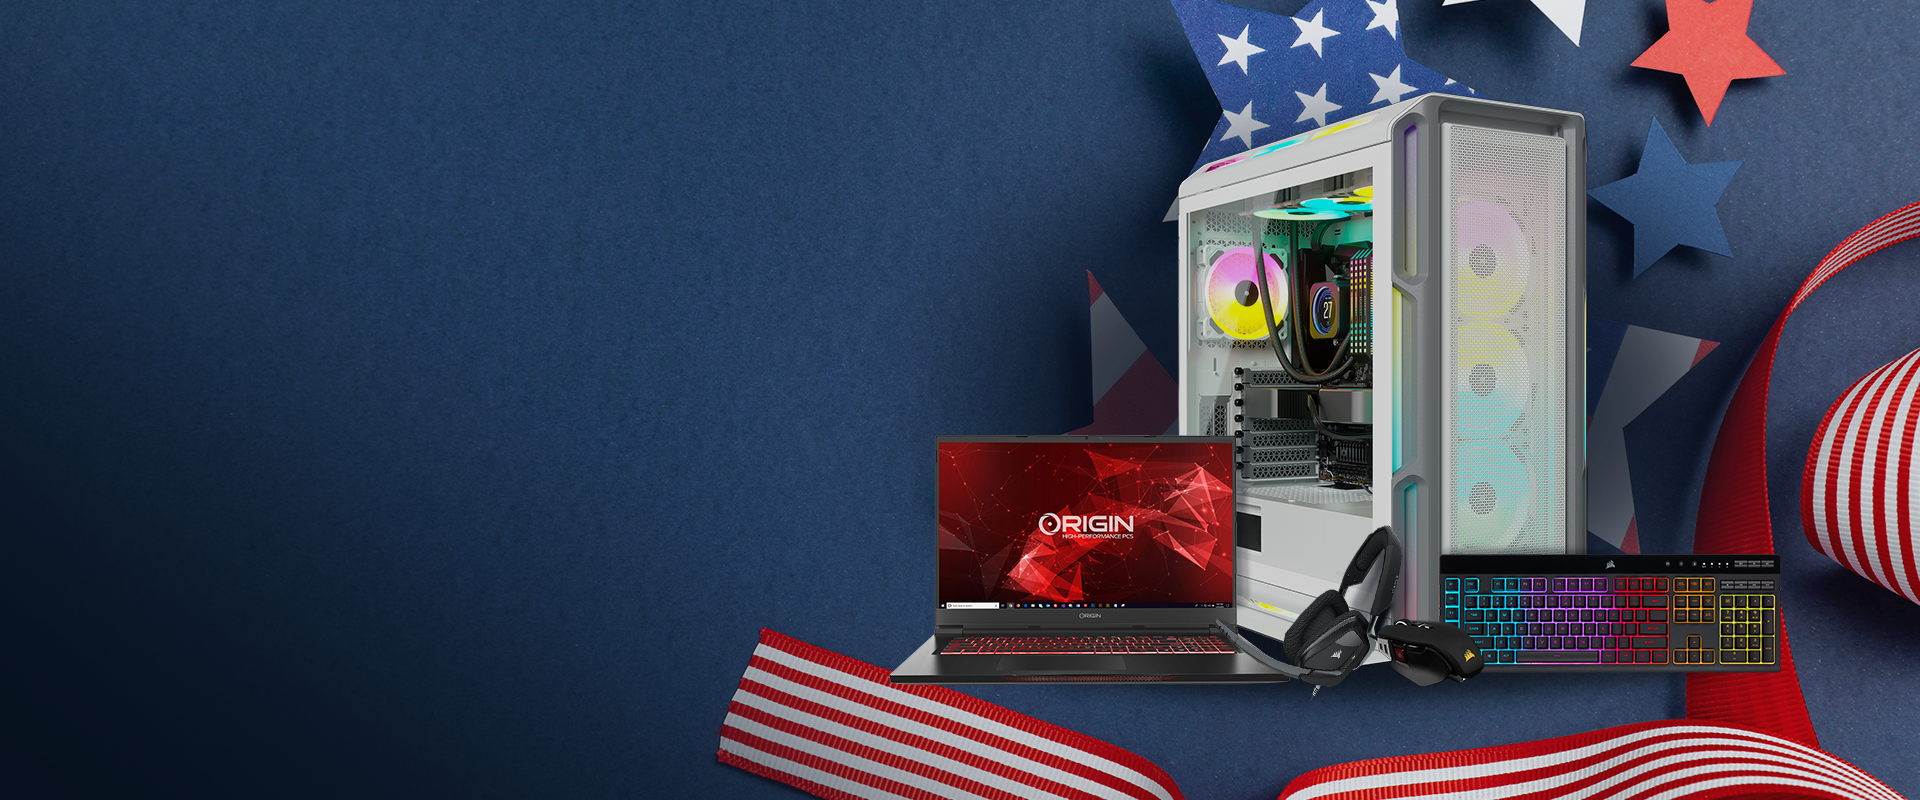 Light up July 4th with an UPGRADE